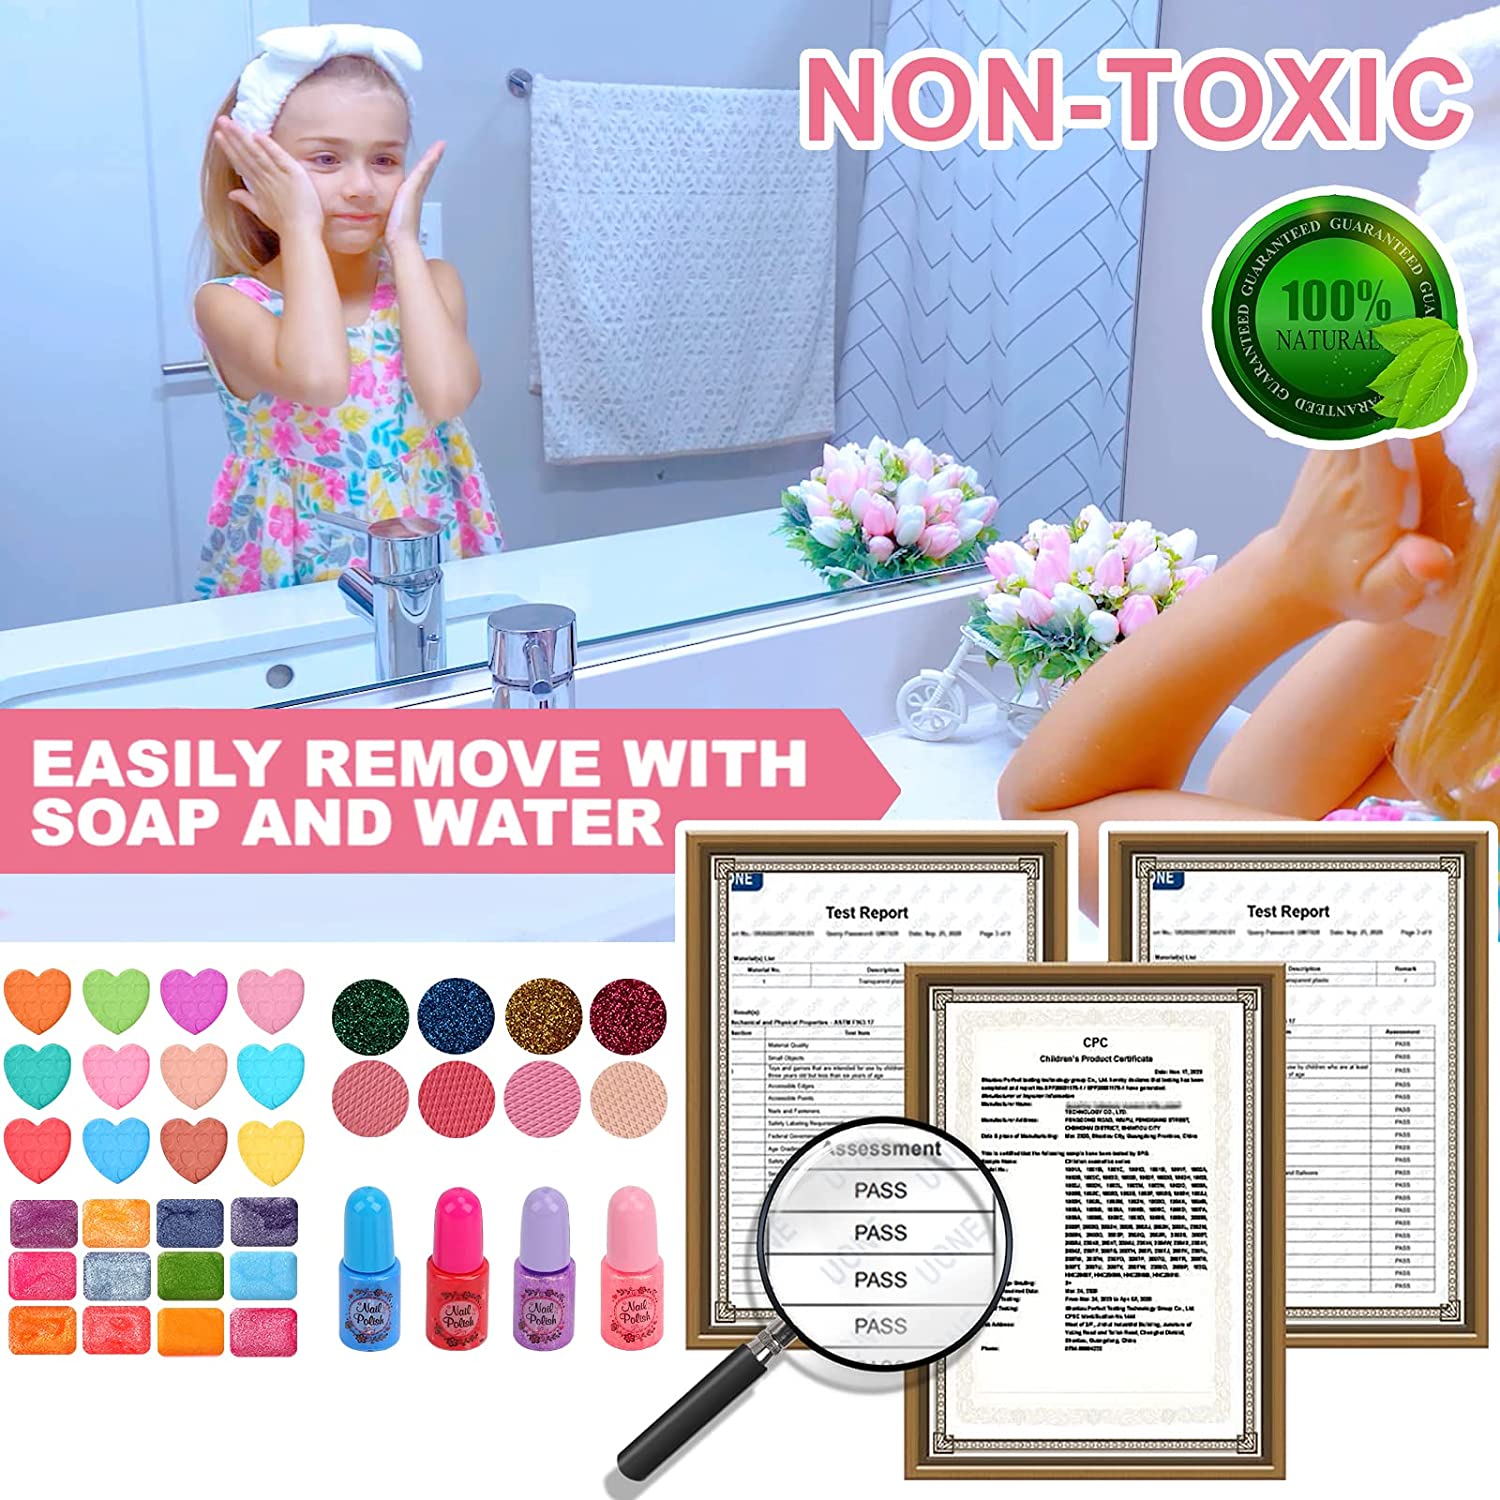 Sendida Washable Kids Makeup Kit for Girls Toys with Cute Makeup Bag, Toy  for Girls Age 3 4 5 6 7 8 9 10 Year Old (25PCS) - Coupon Codes, Promo  Codes, Daily Deals, Save Money Today